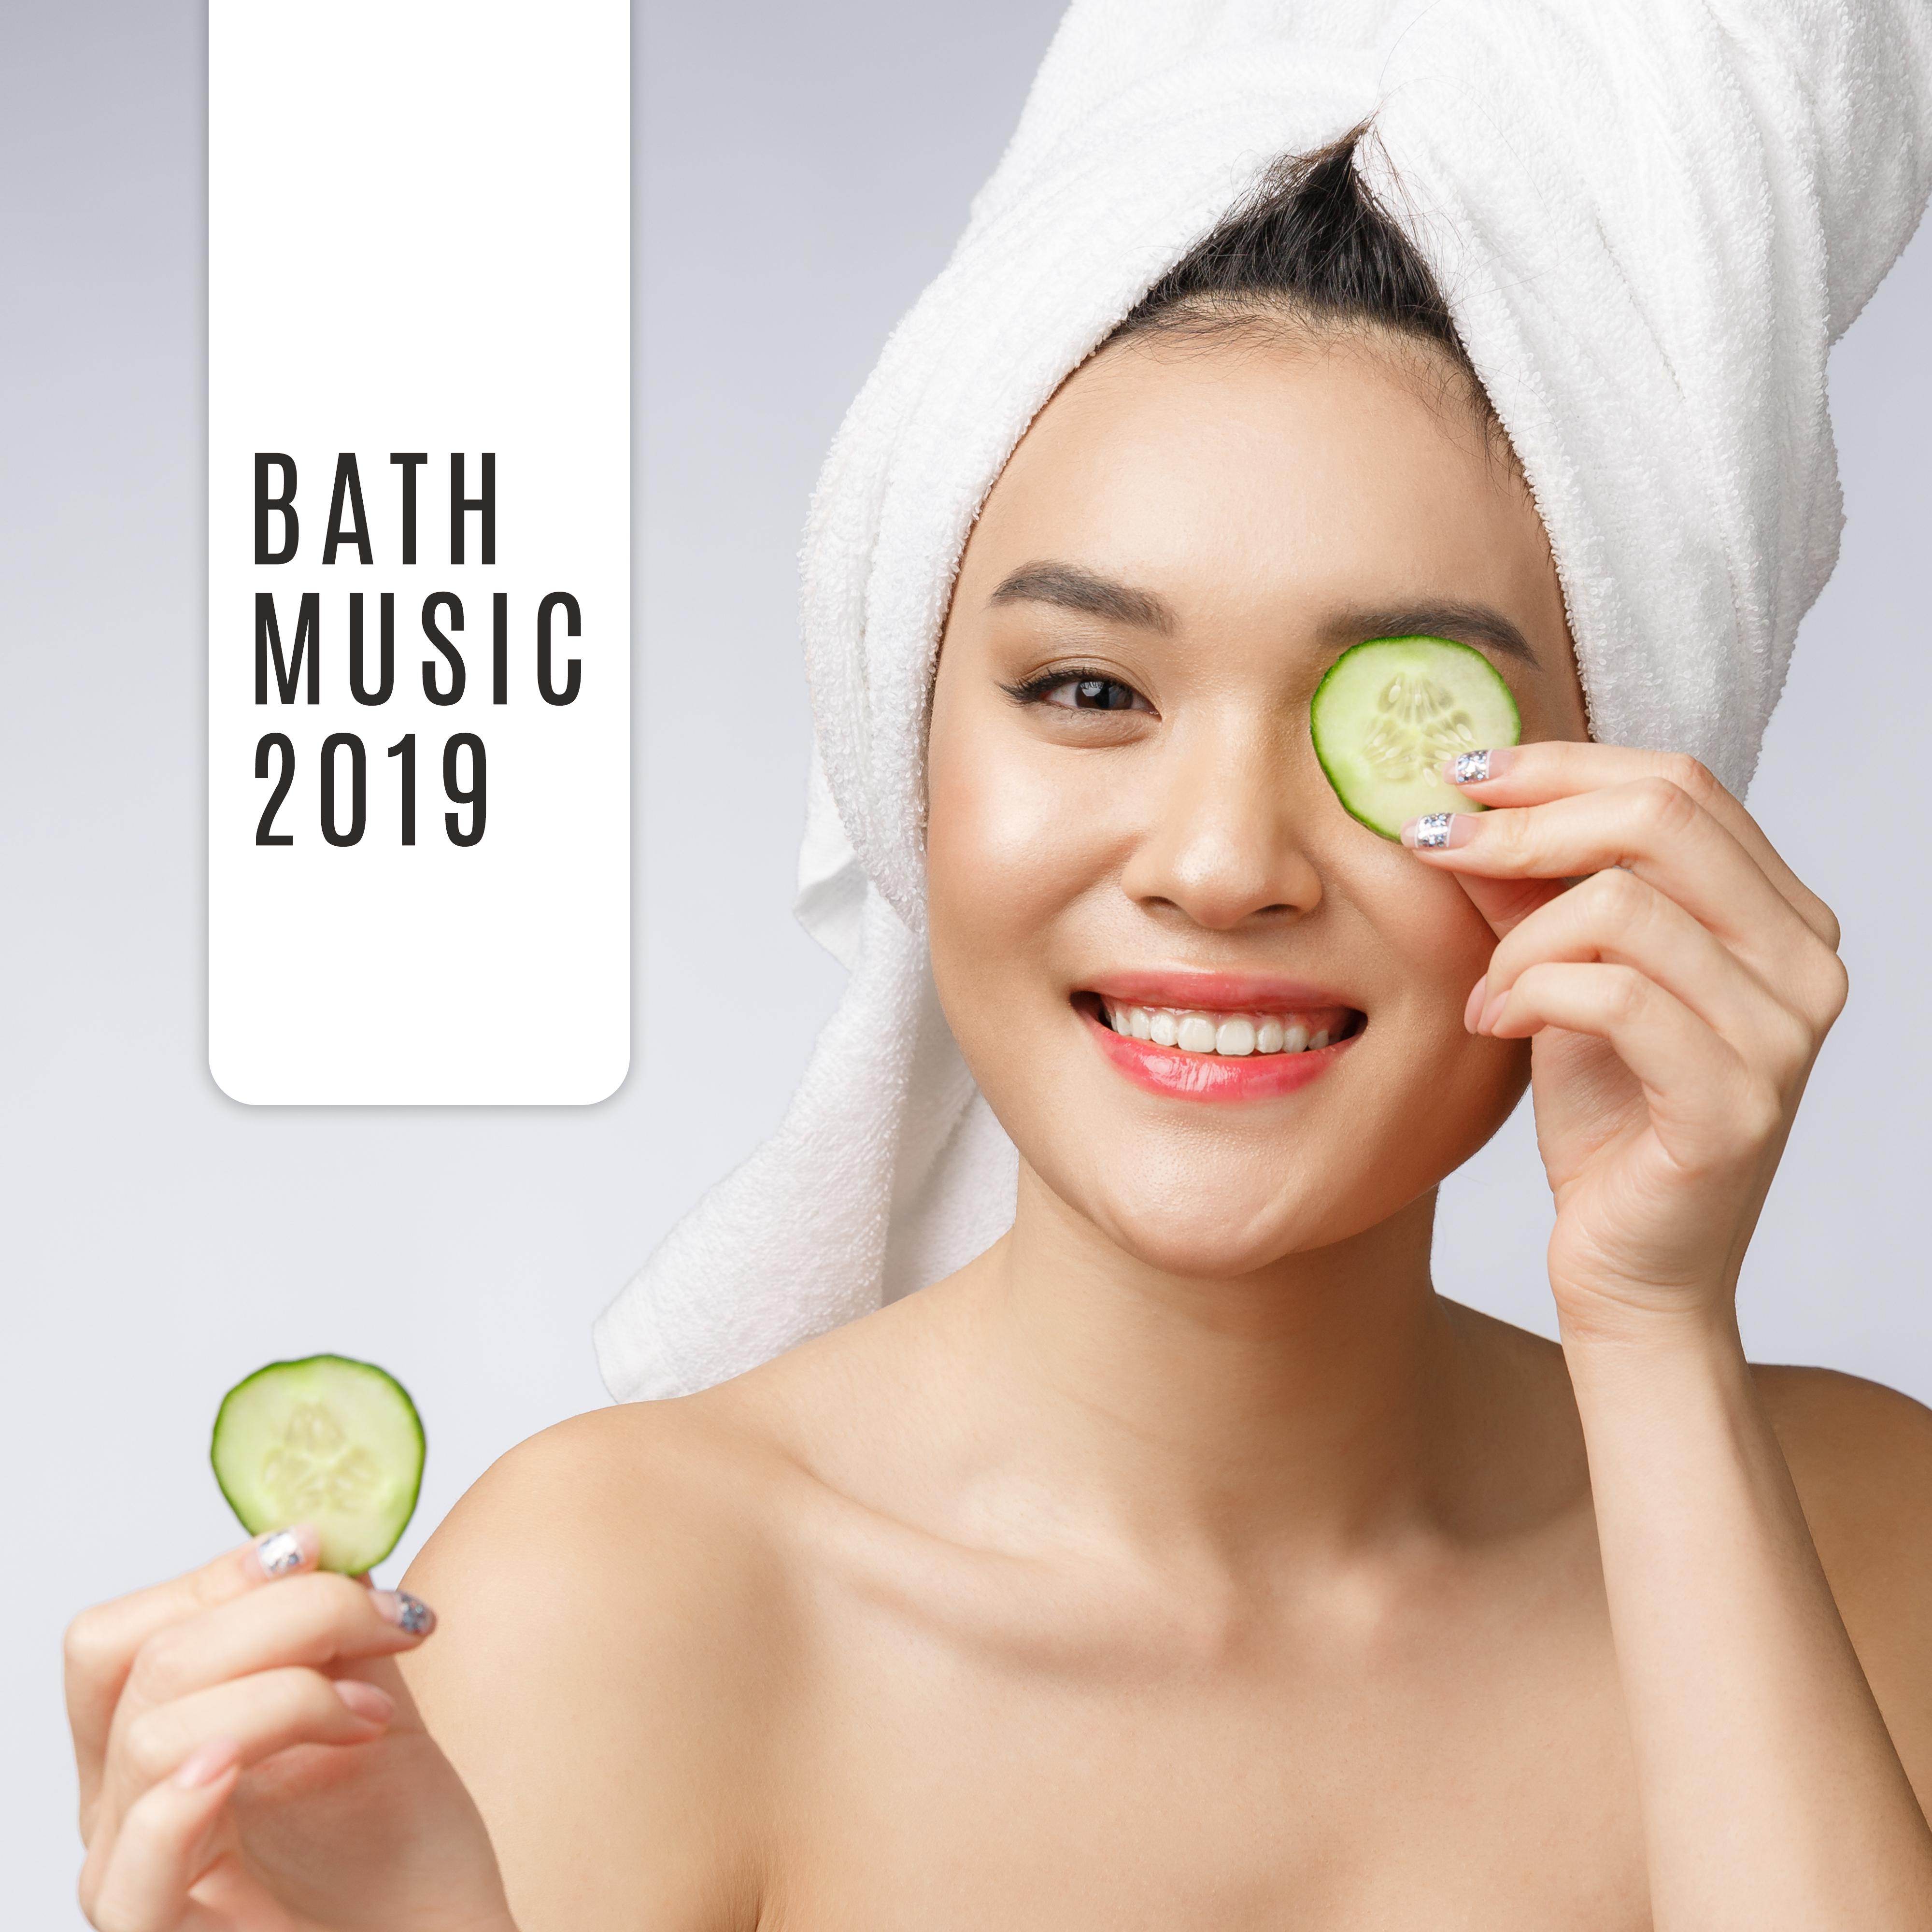 Bath Music 2019  Spa Chillout, Massage Music, Relax Zone, Chillout for Bath, Luxury Spa Tunes, Hotel Spa, Pure Relaxation, Zen, Chillout Lounge